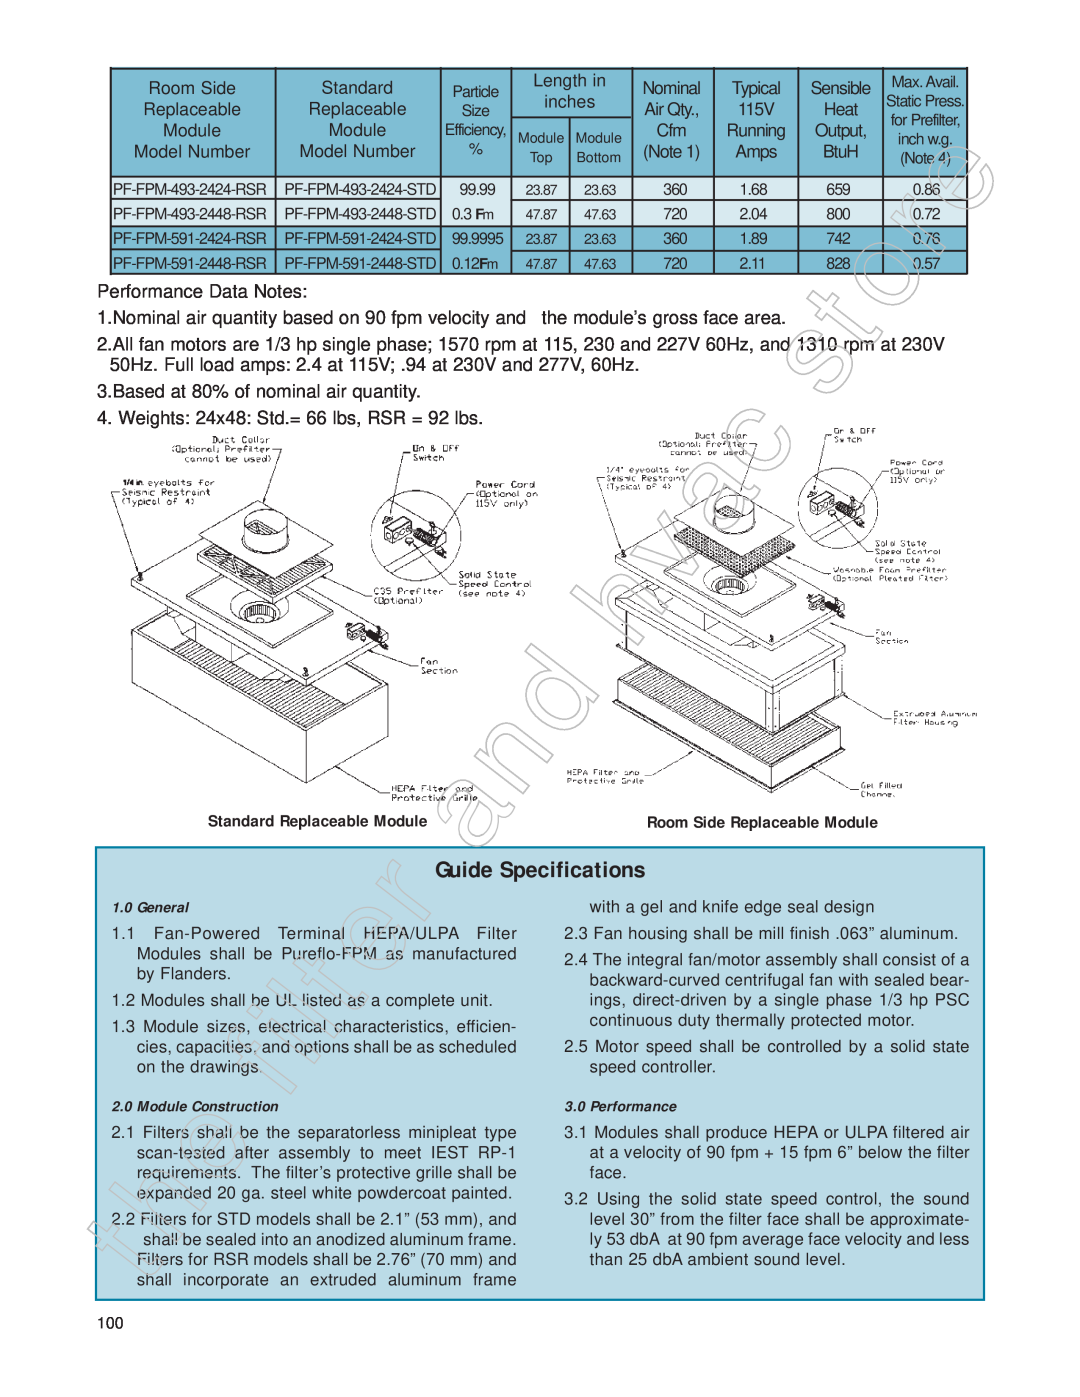 Honeywell 11255 manual Guide Specifications, Performance Data Notes, Based at 80% of nominal air quantity 